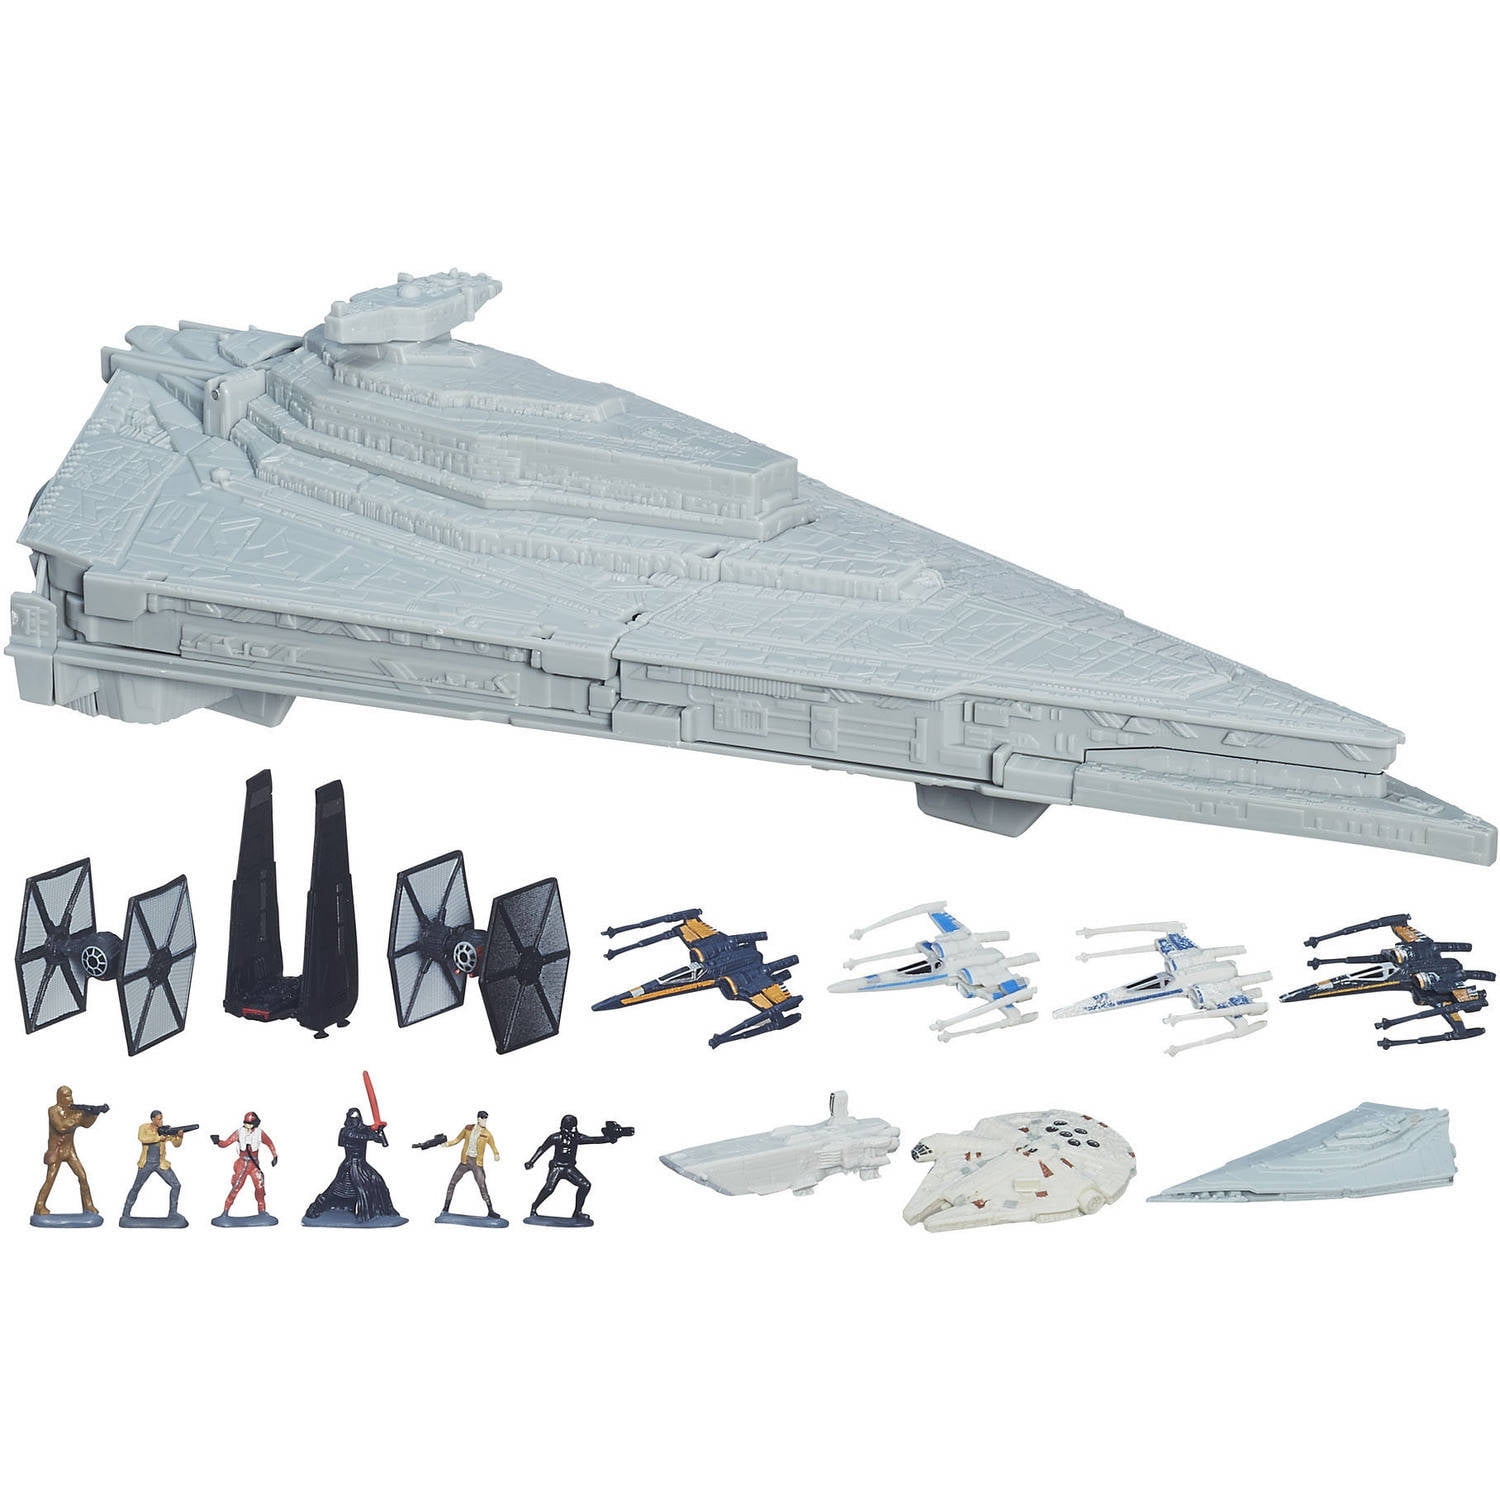 STAR WARS FORCE AWAKENS MICRO MACHINES FIRST ORDER STAR DESTROYER micromachines